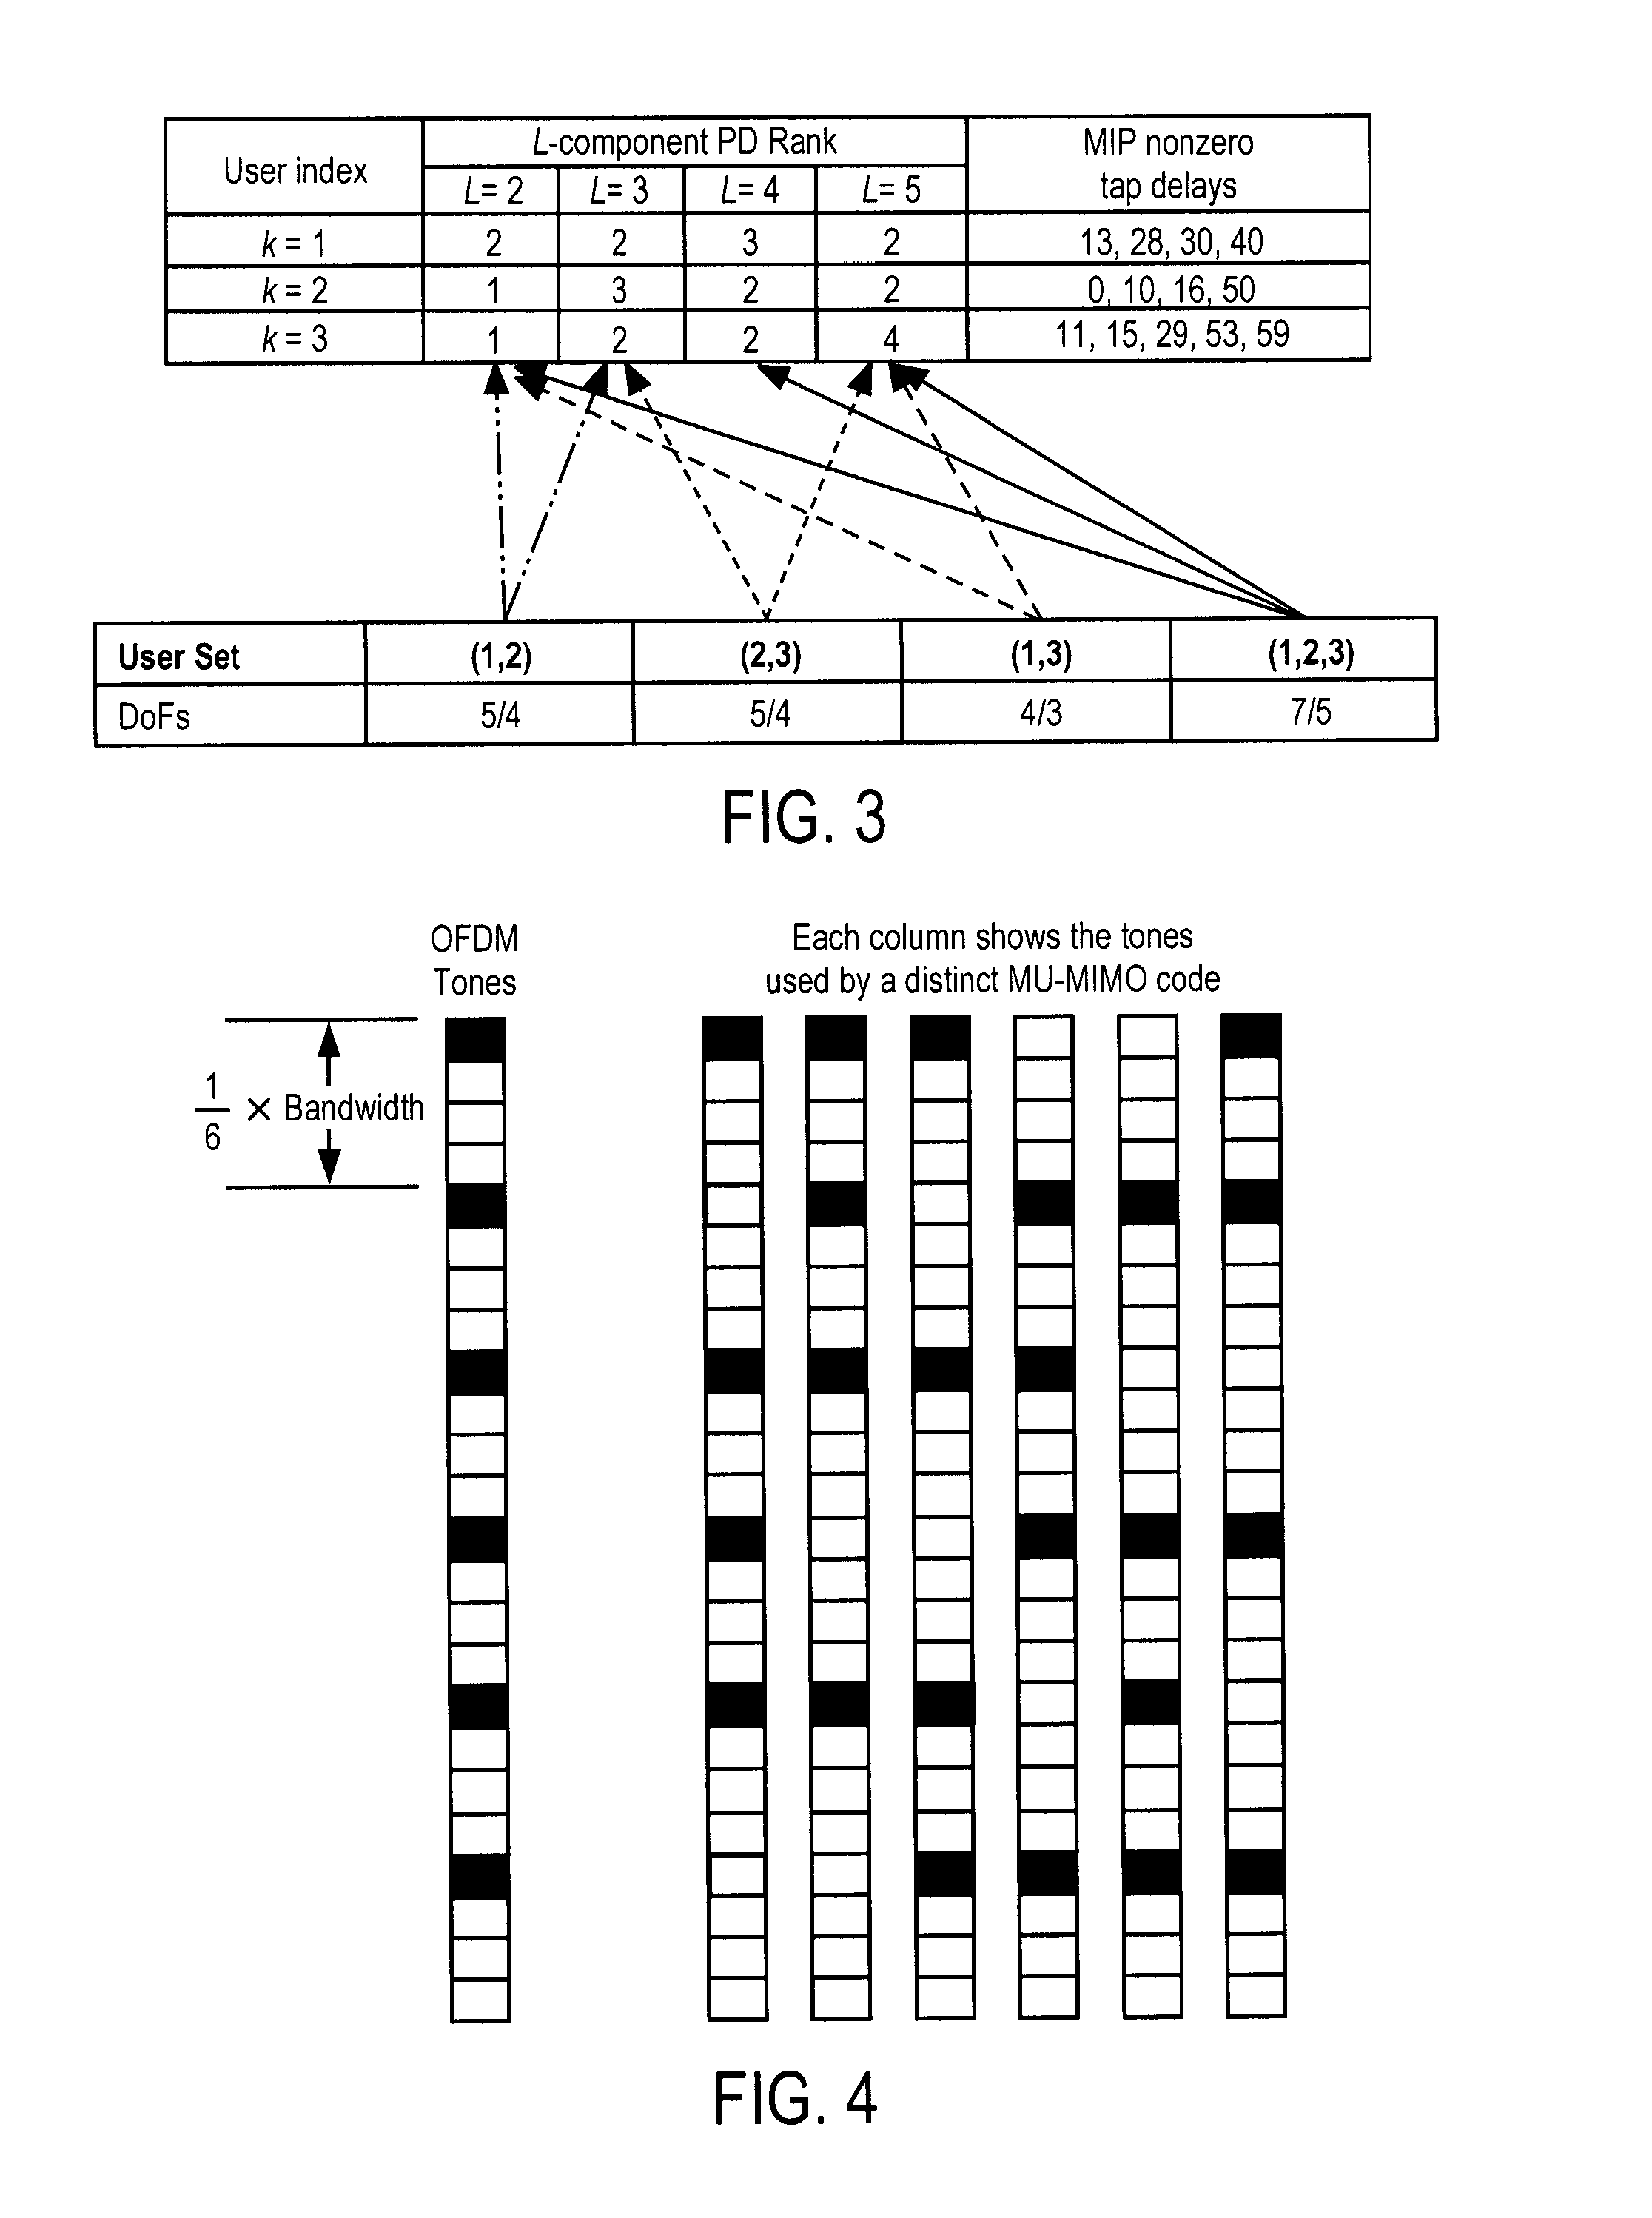 Method for scheduling and MU-MIMO transmission over OFDM via interference alignment based on user multipath intensity profile information